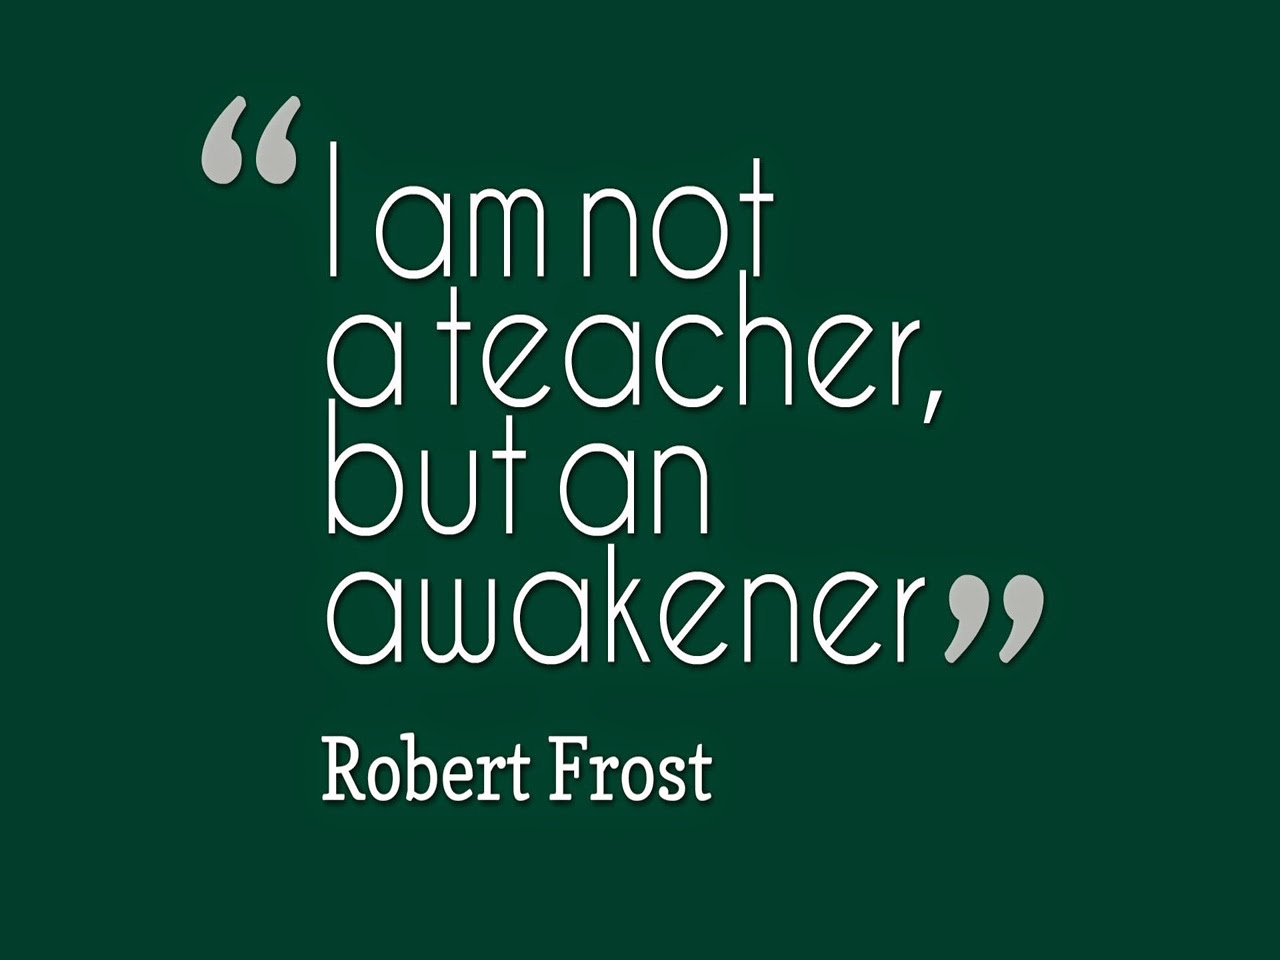 Education Quotes, Sayings By Famous Authors And People - Poetry Likers